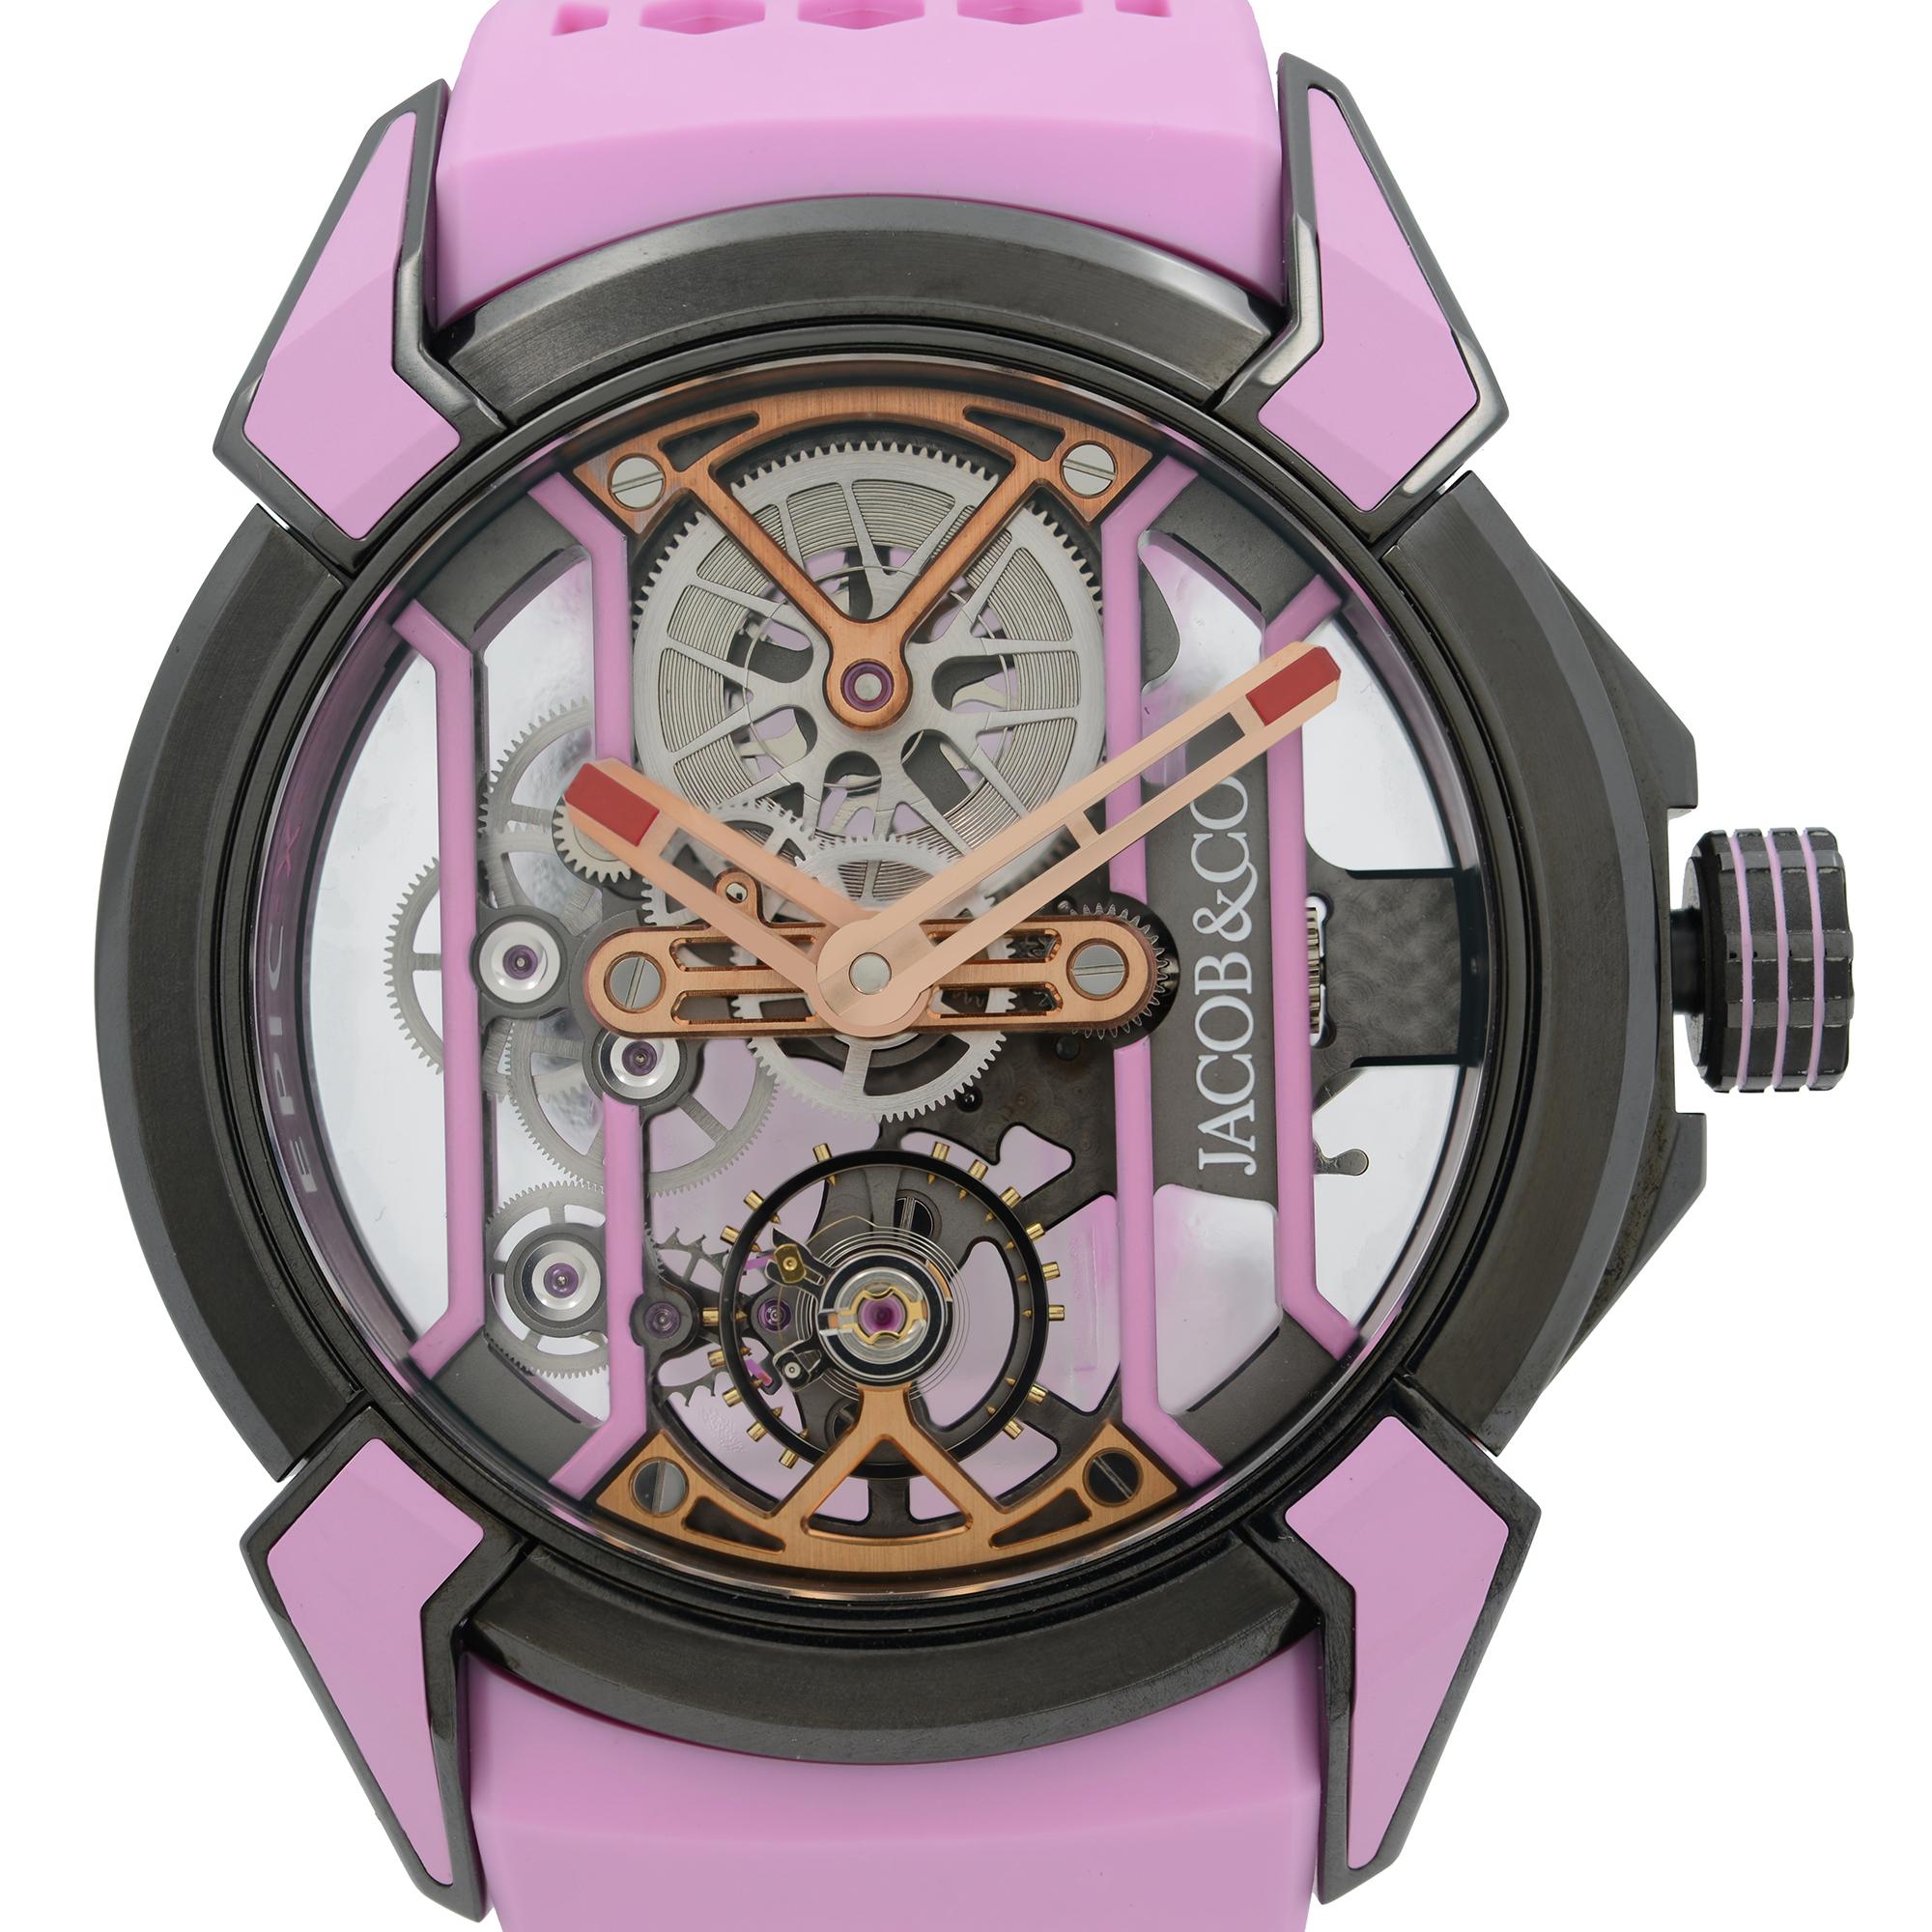 Unworn Jacob & Co Epic X Titanium Skeleton Dial Hand-Wind Unisex Watch EX100.21.PR.PB.ALO3A. This Beautiful Timepiece is Powered by Mechanical (Manual) Movement And Features: Black & Pink Titanium Case with a Pink Rubber Honeycomb Buckle Strap,